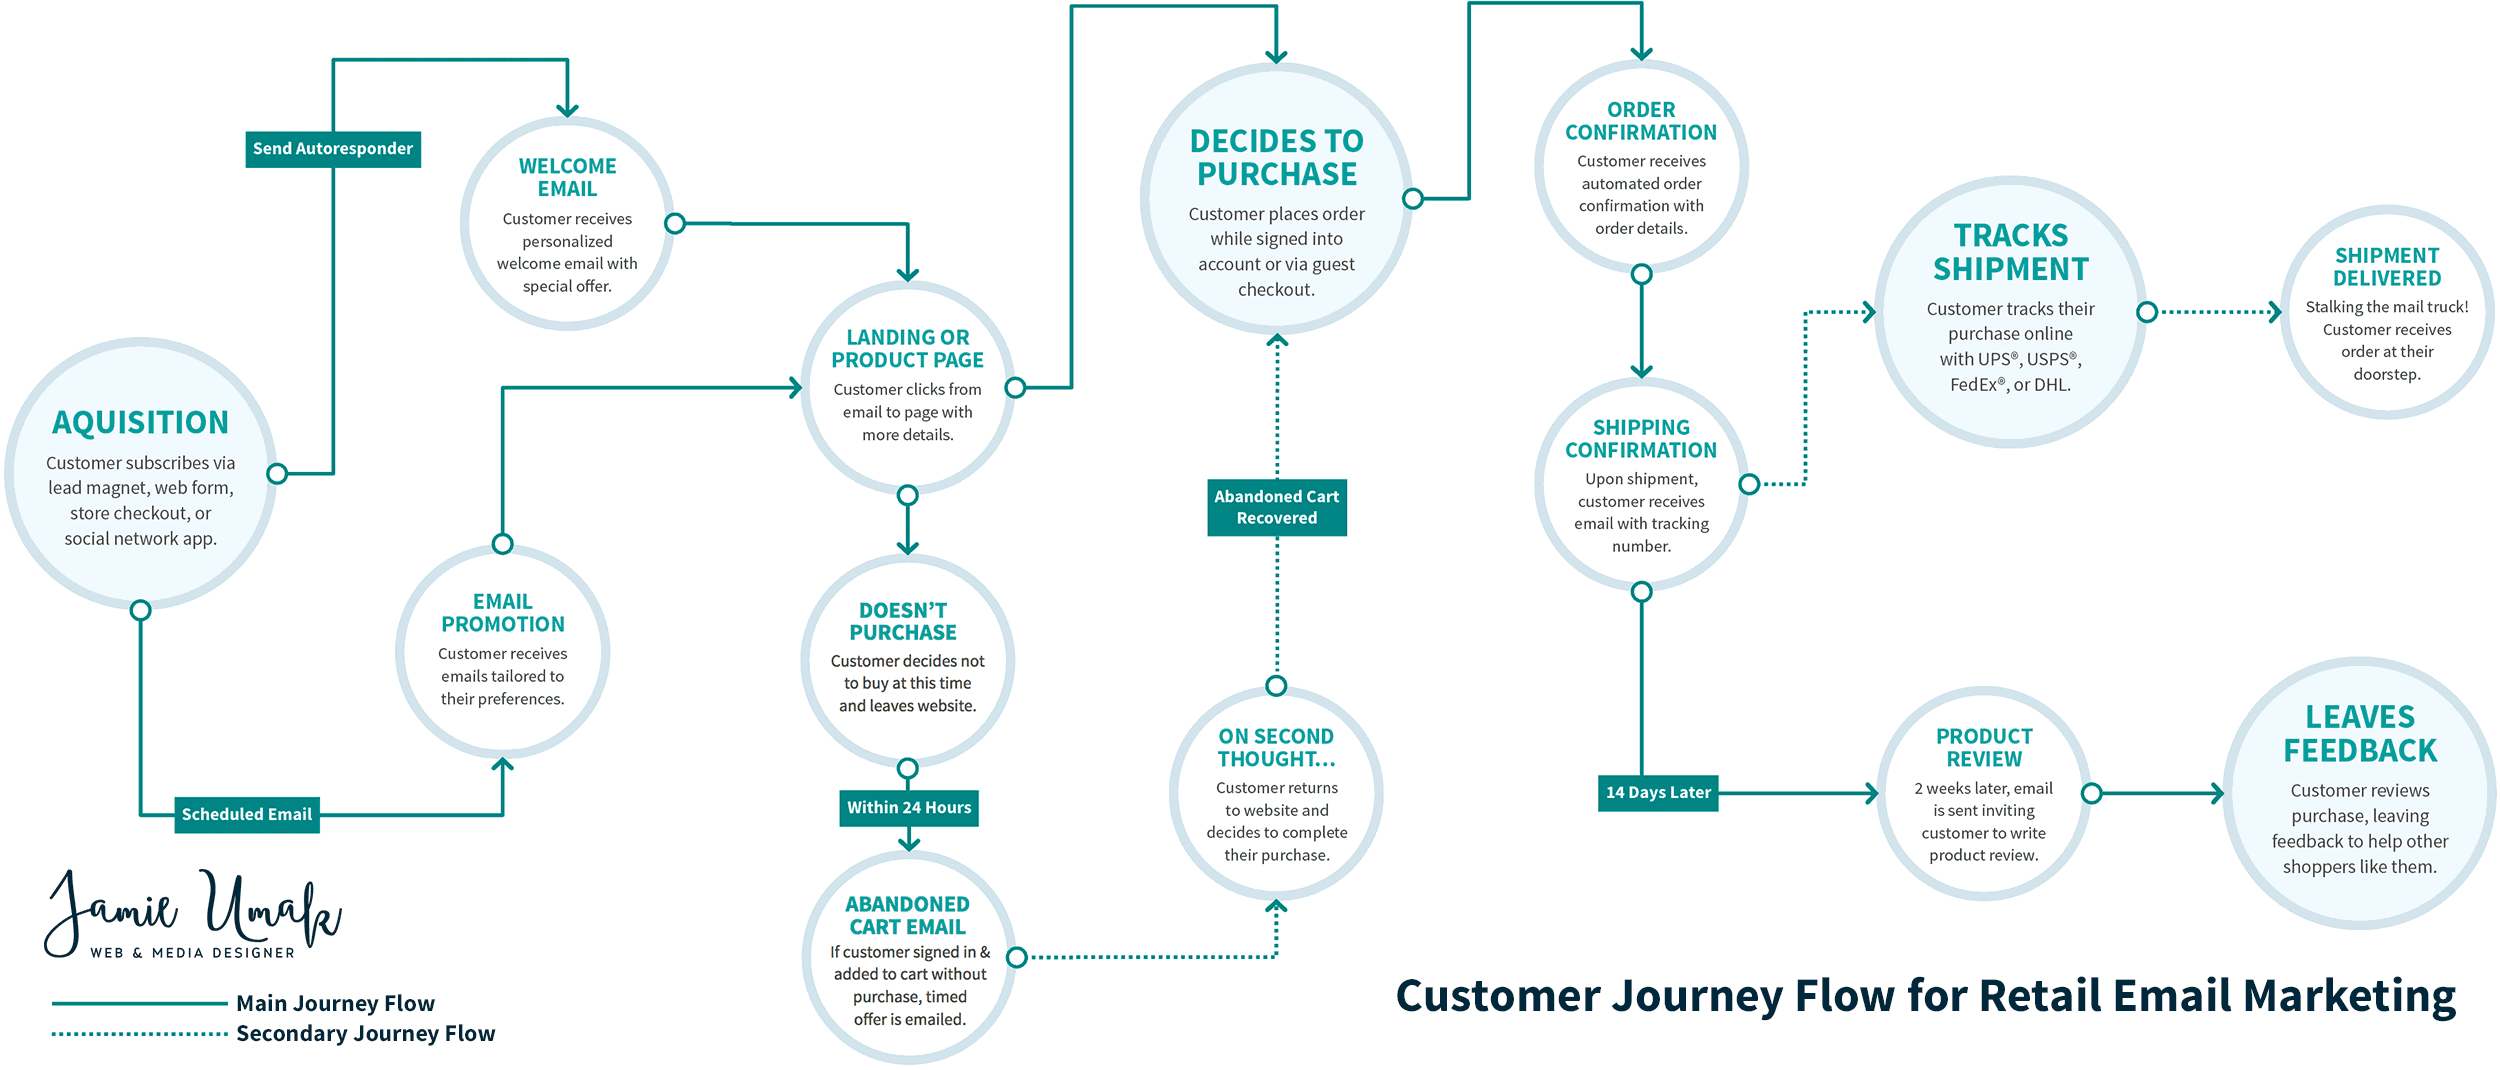 Chart: Customer Journey Flow for Retail Email Marketing